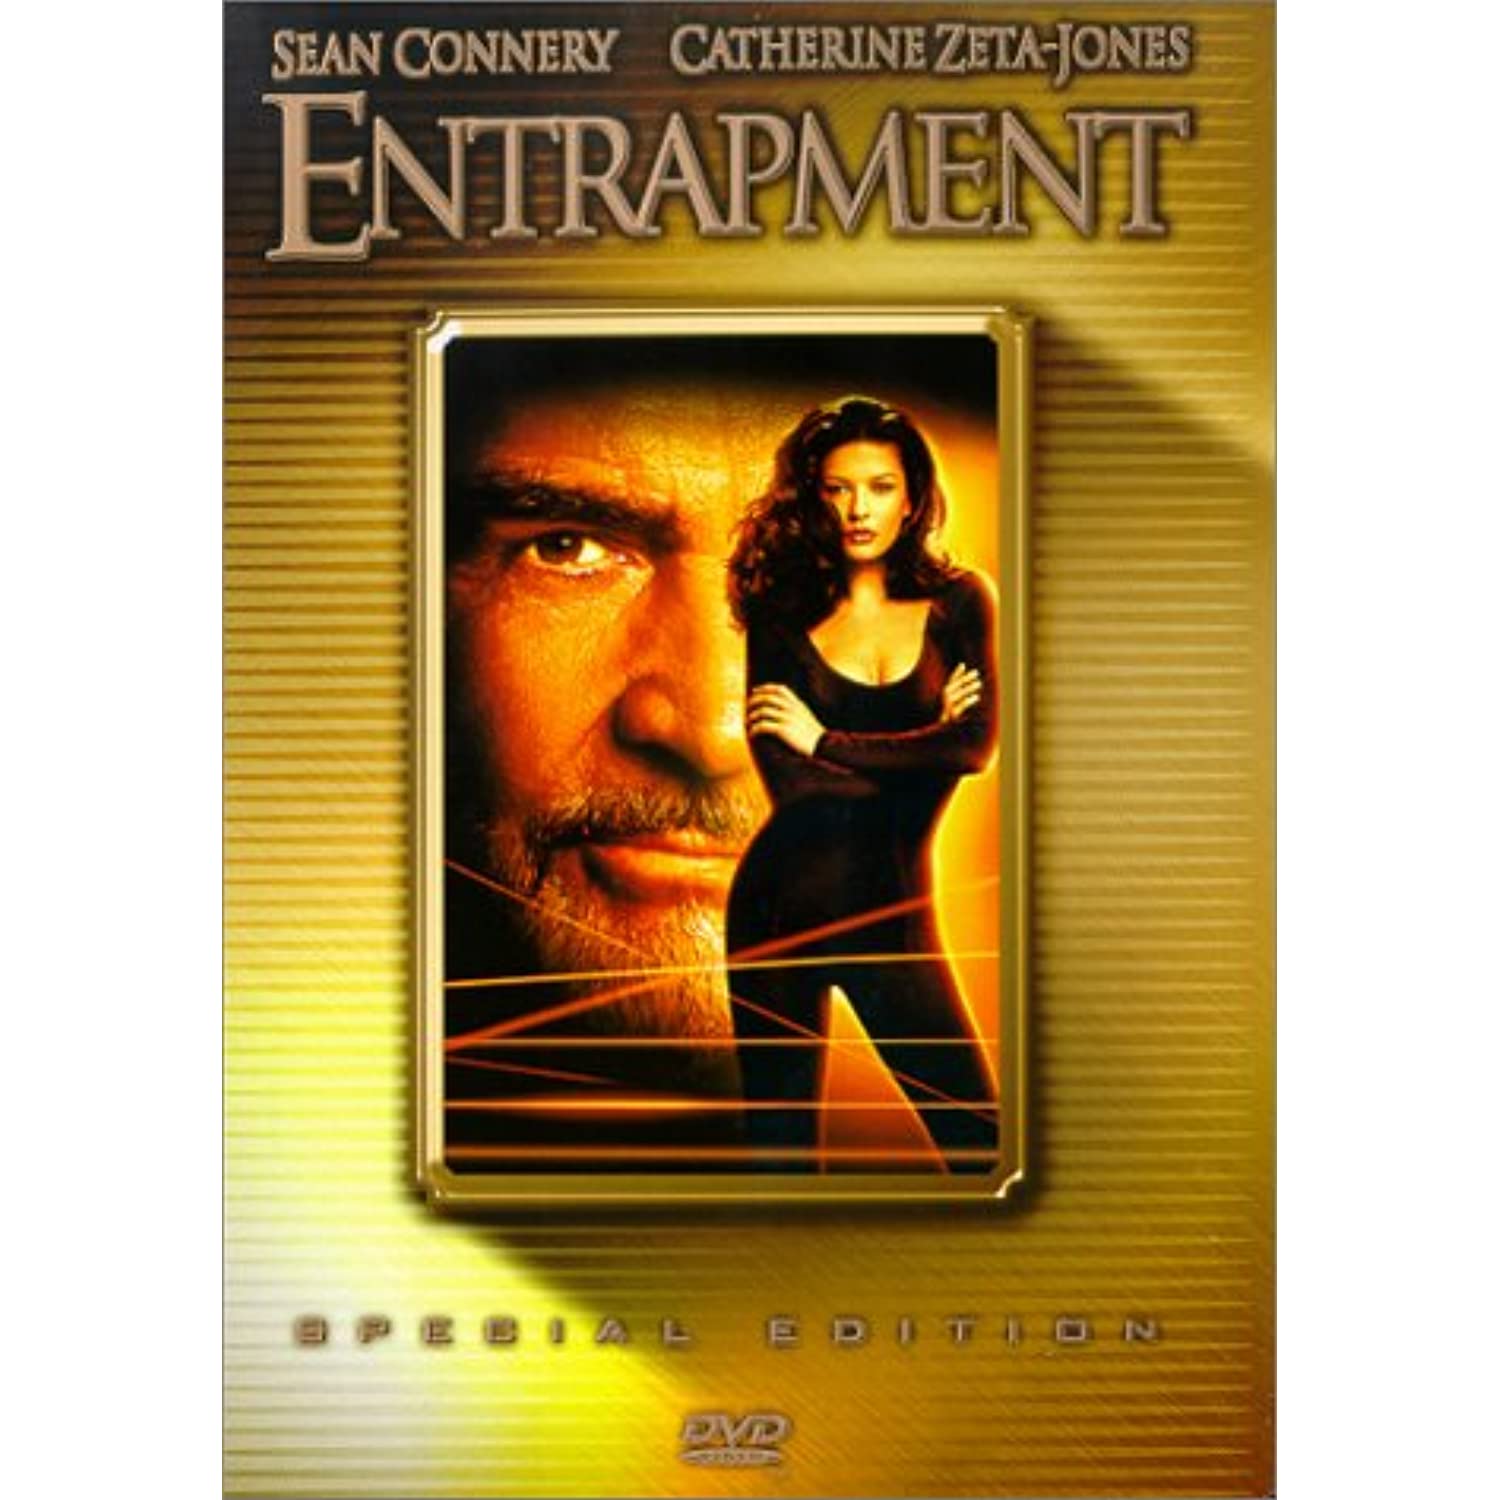 Entrapment (Special Edition) (Anamorphic Widescreen) - image 1 of 2